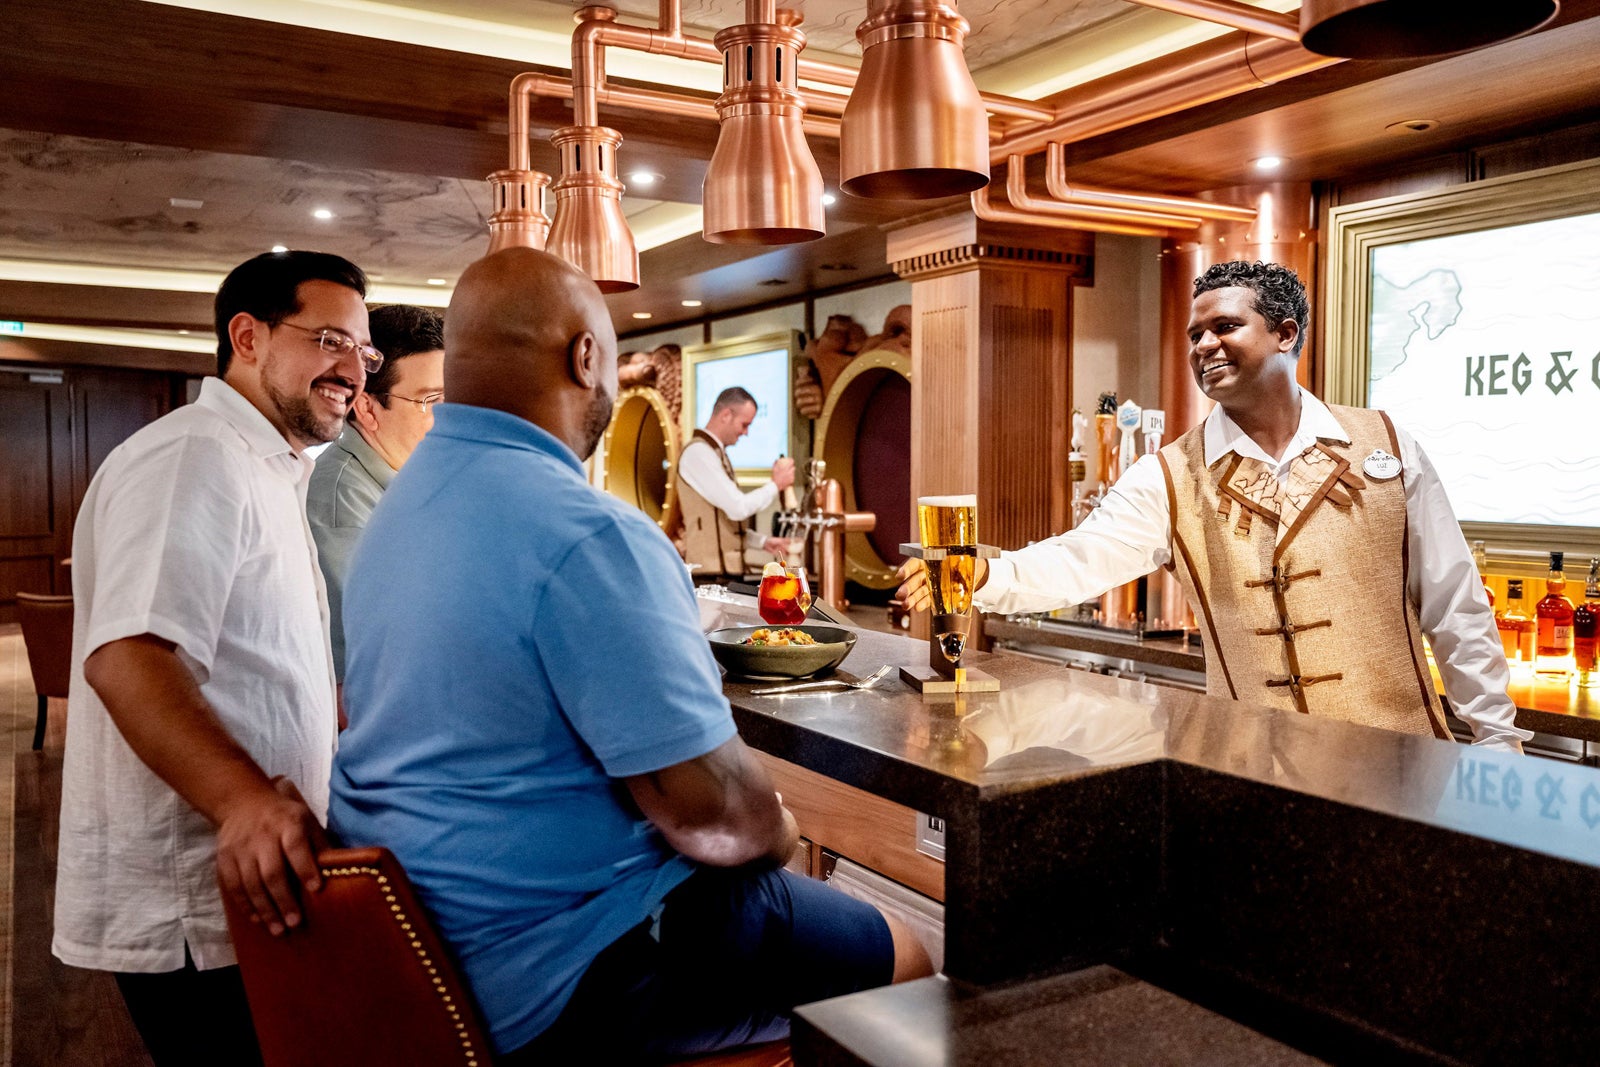 disney cruise line alcohol policy